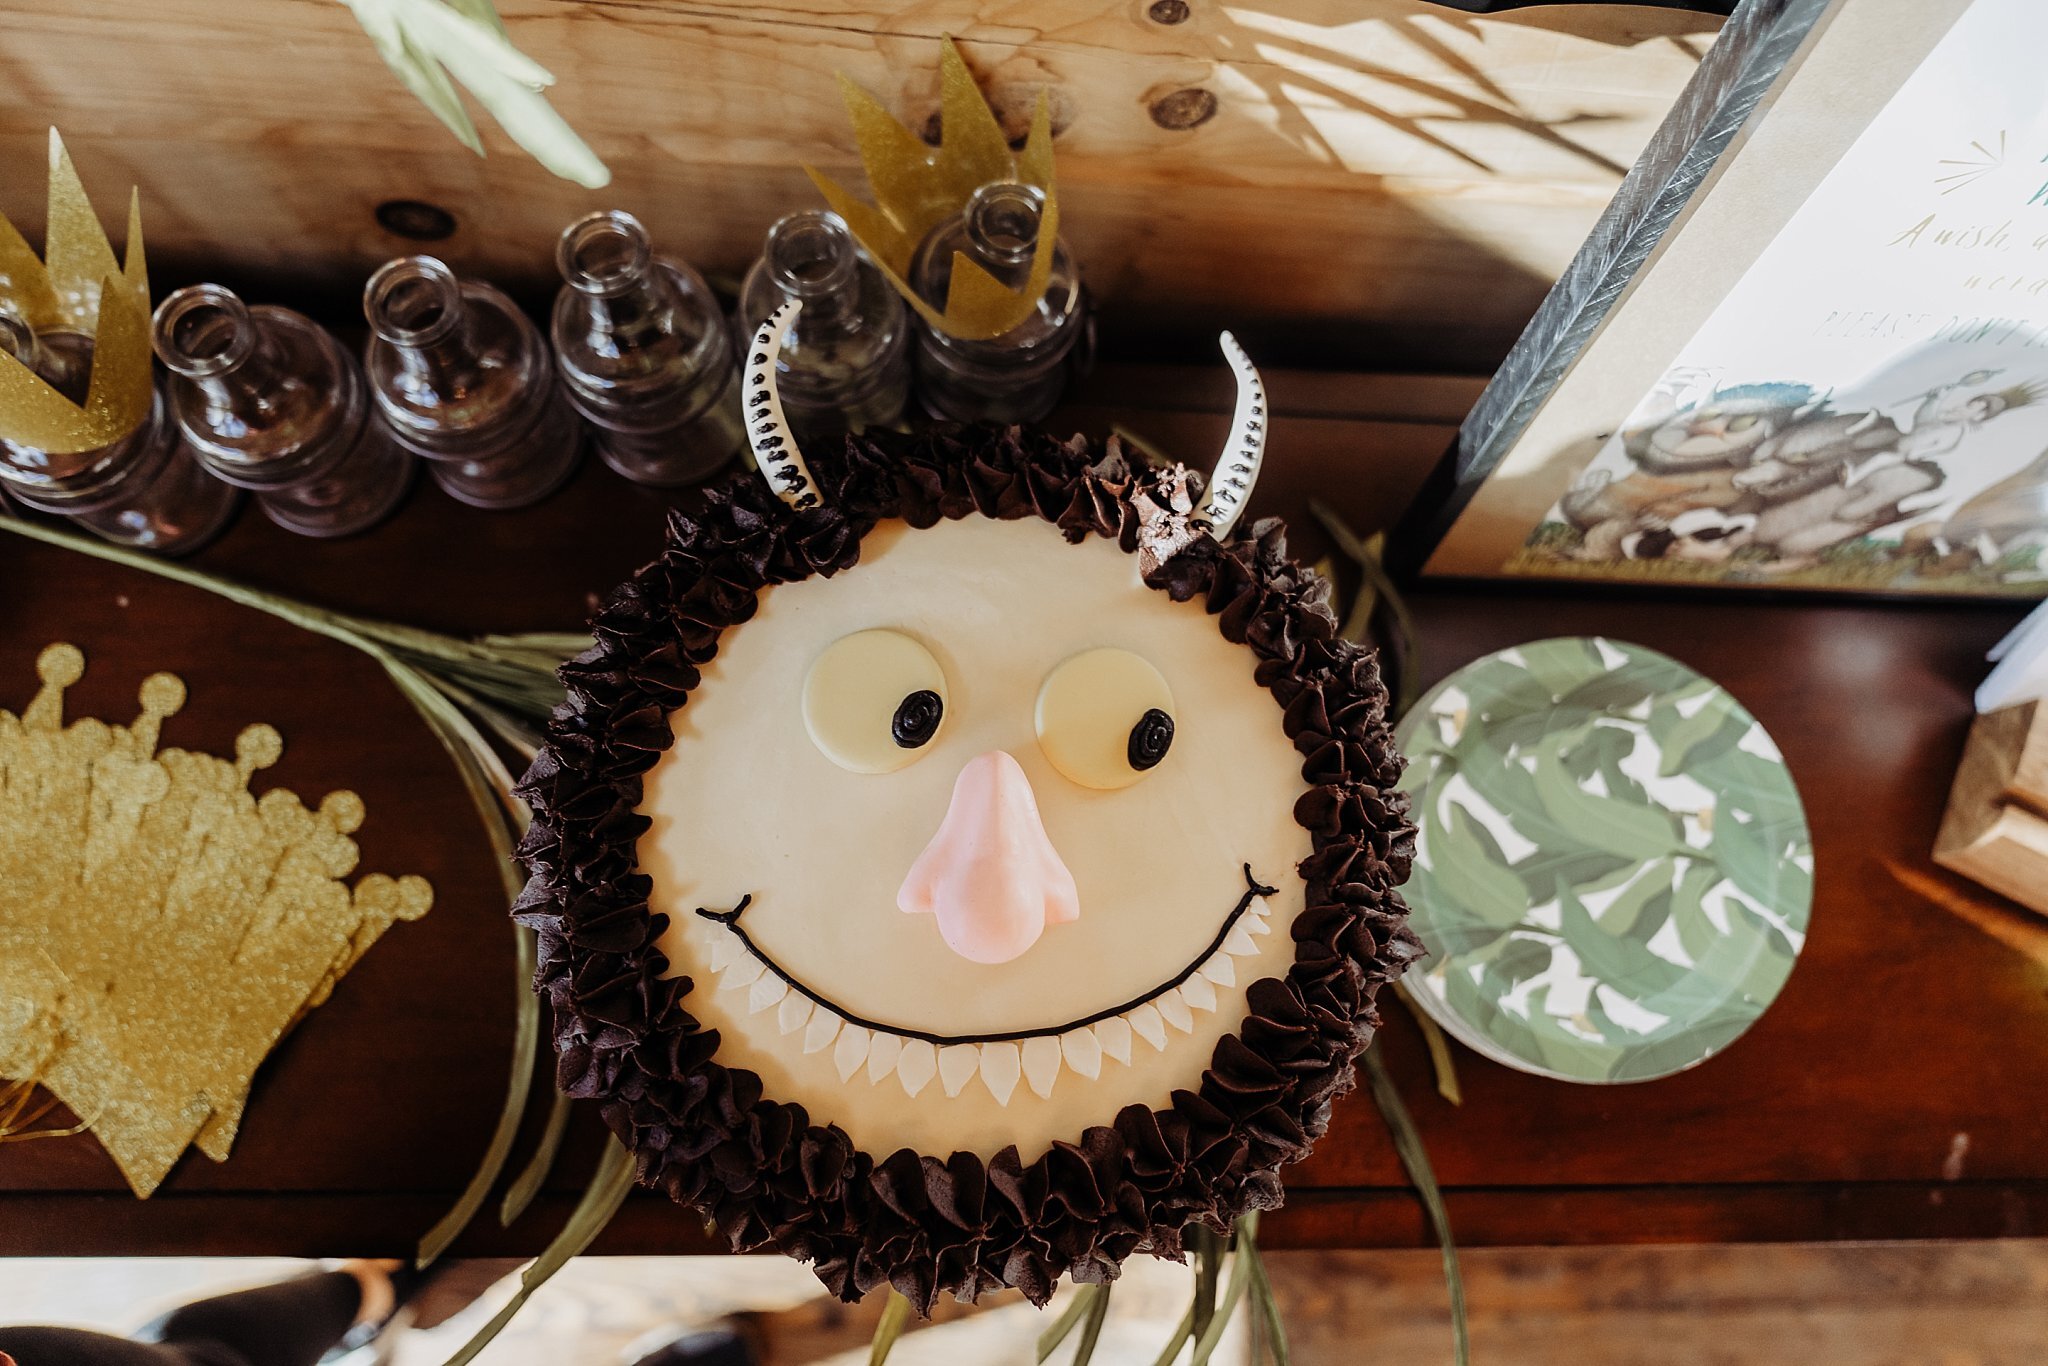 Where the Wild Things Are themed birthday party cake